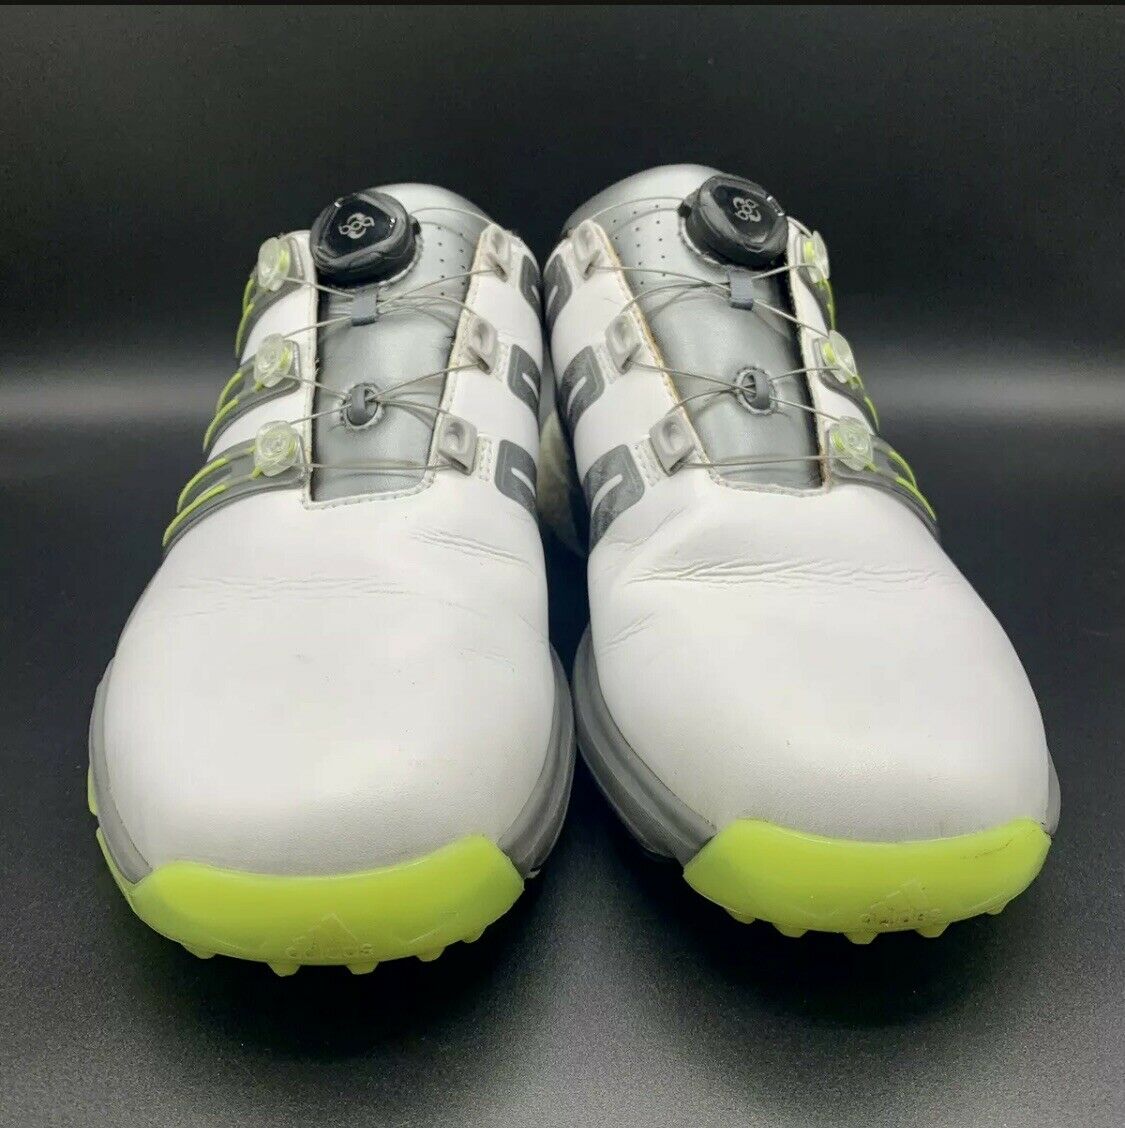 Adidas Powerband Boa Boost Mens Size 12 White Low Top Golf Sneaker Shoes Q44848